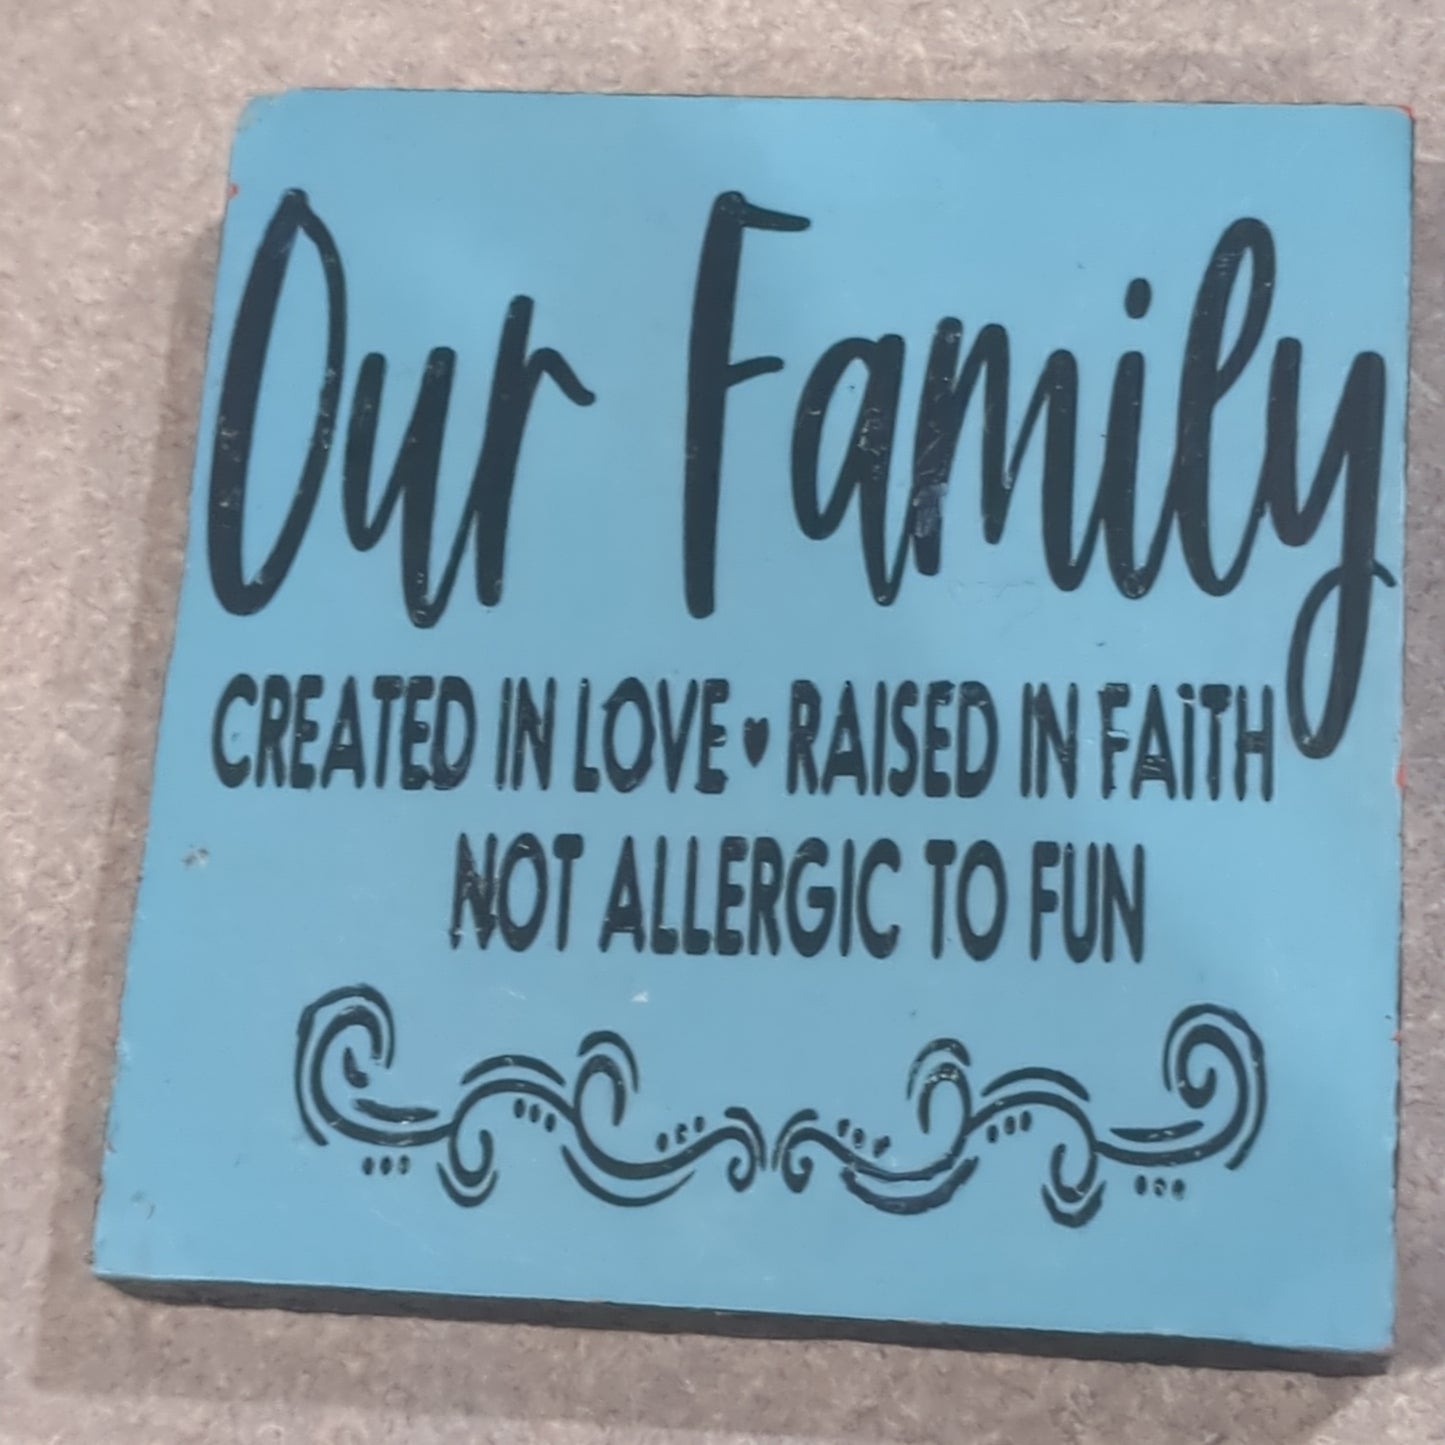 Wooden double sided sign 4" square